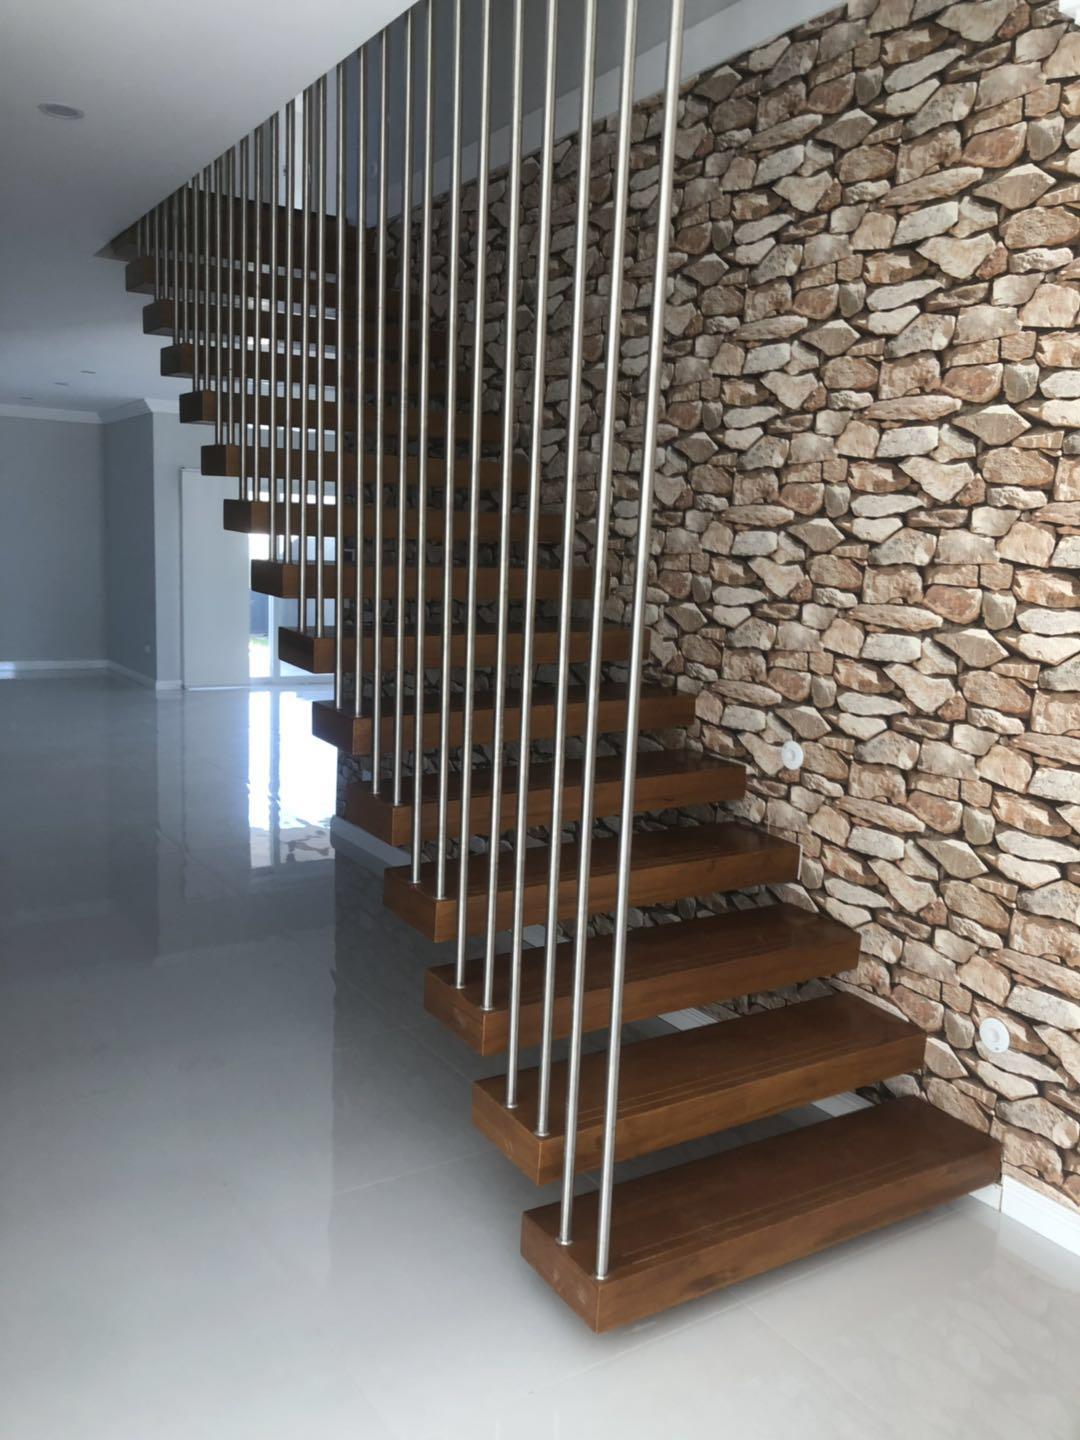 YUDI Stairs Customized floating glass staircase for villa